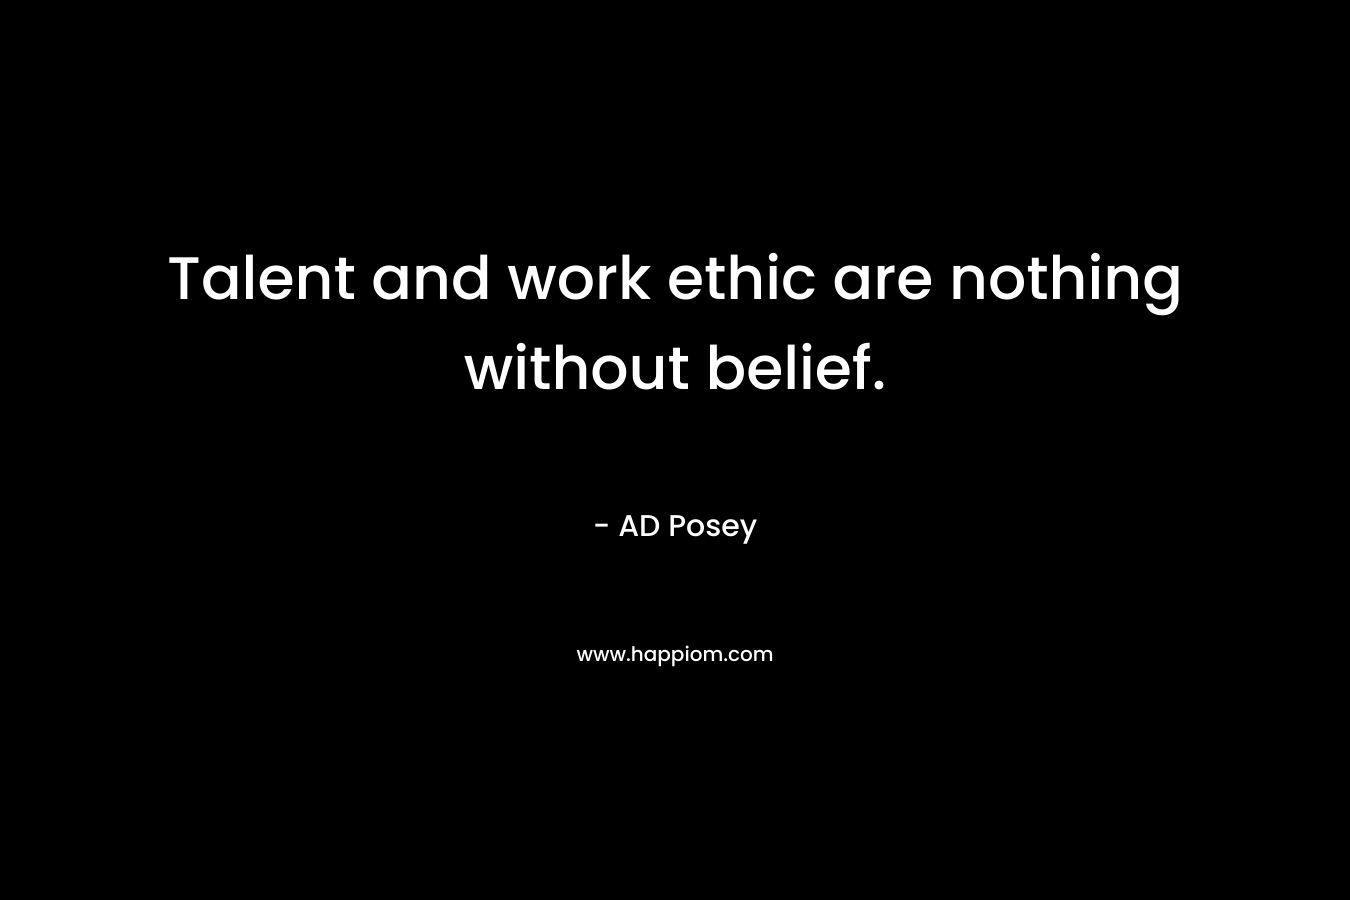 Talent and work ethic are nothing without belief.